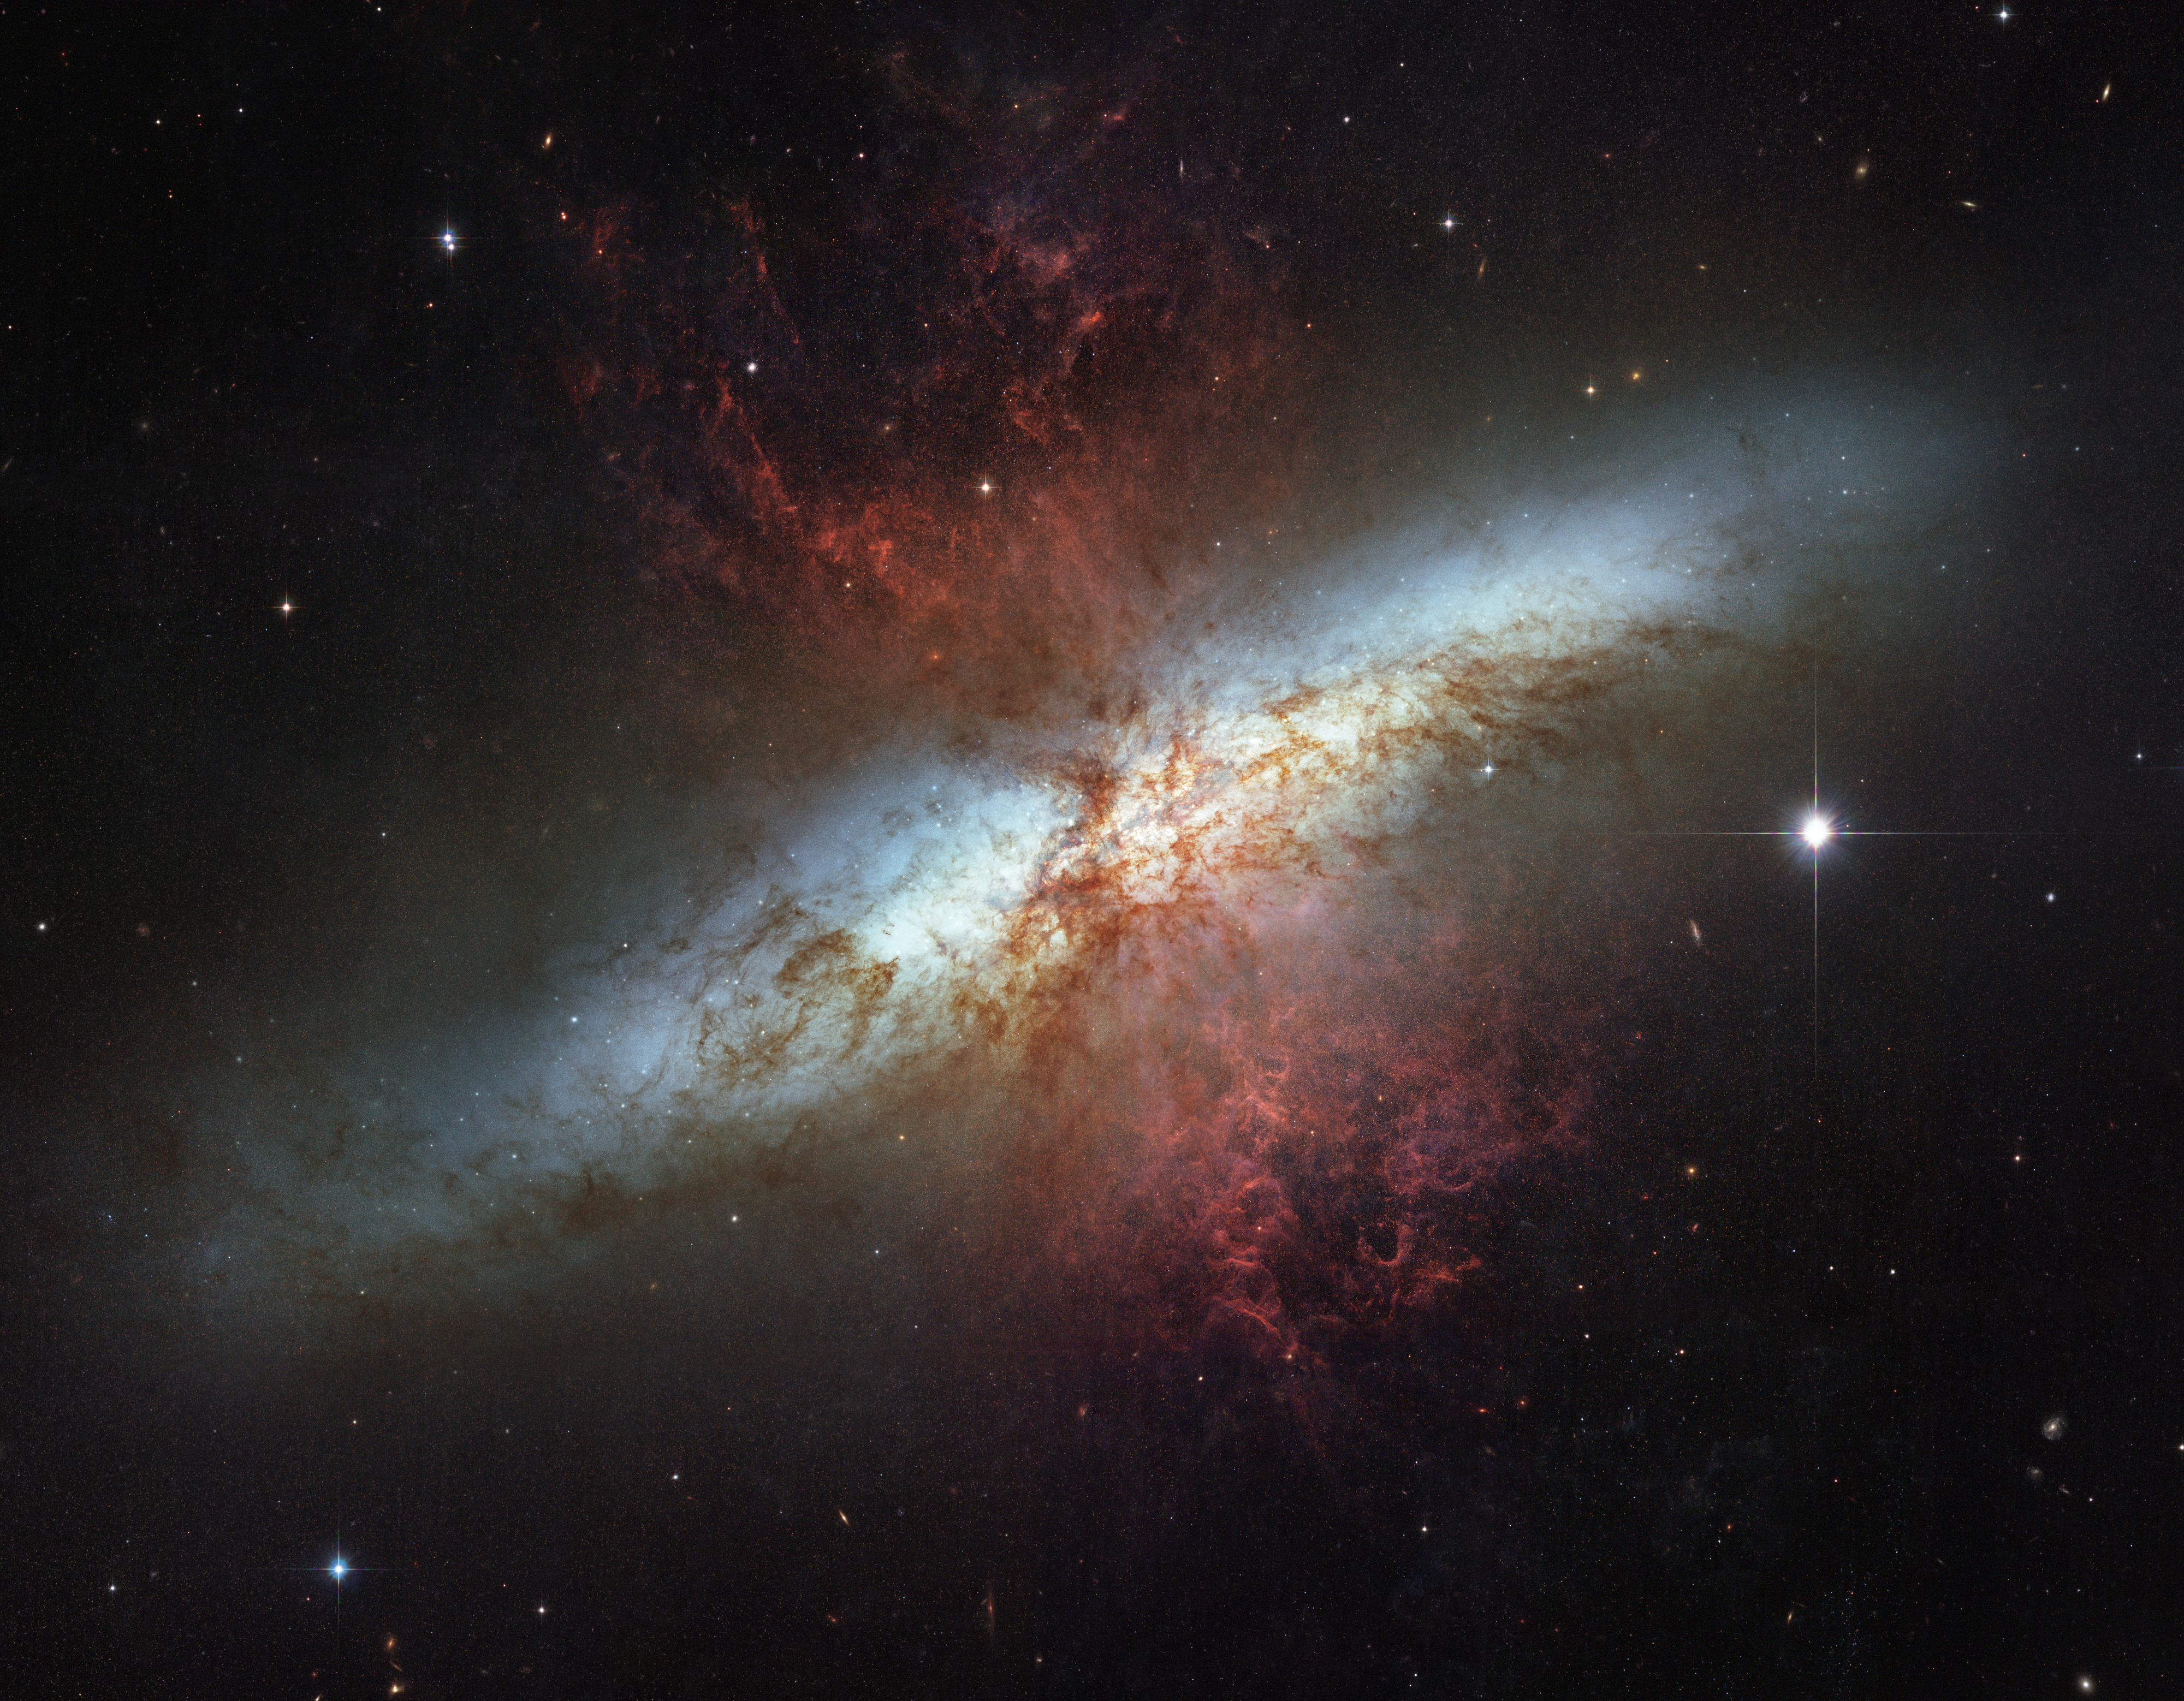 The galaxy is messy. its main body is a bright blue-white fuzzy region. On top of it at ninety degrees an hourshape glass of red dust and gas is visible